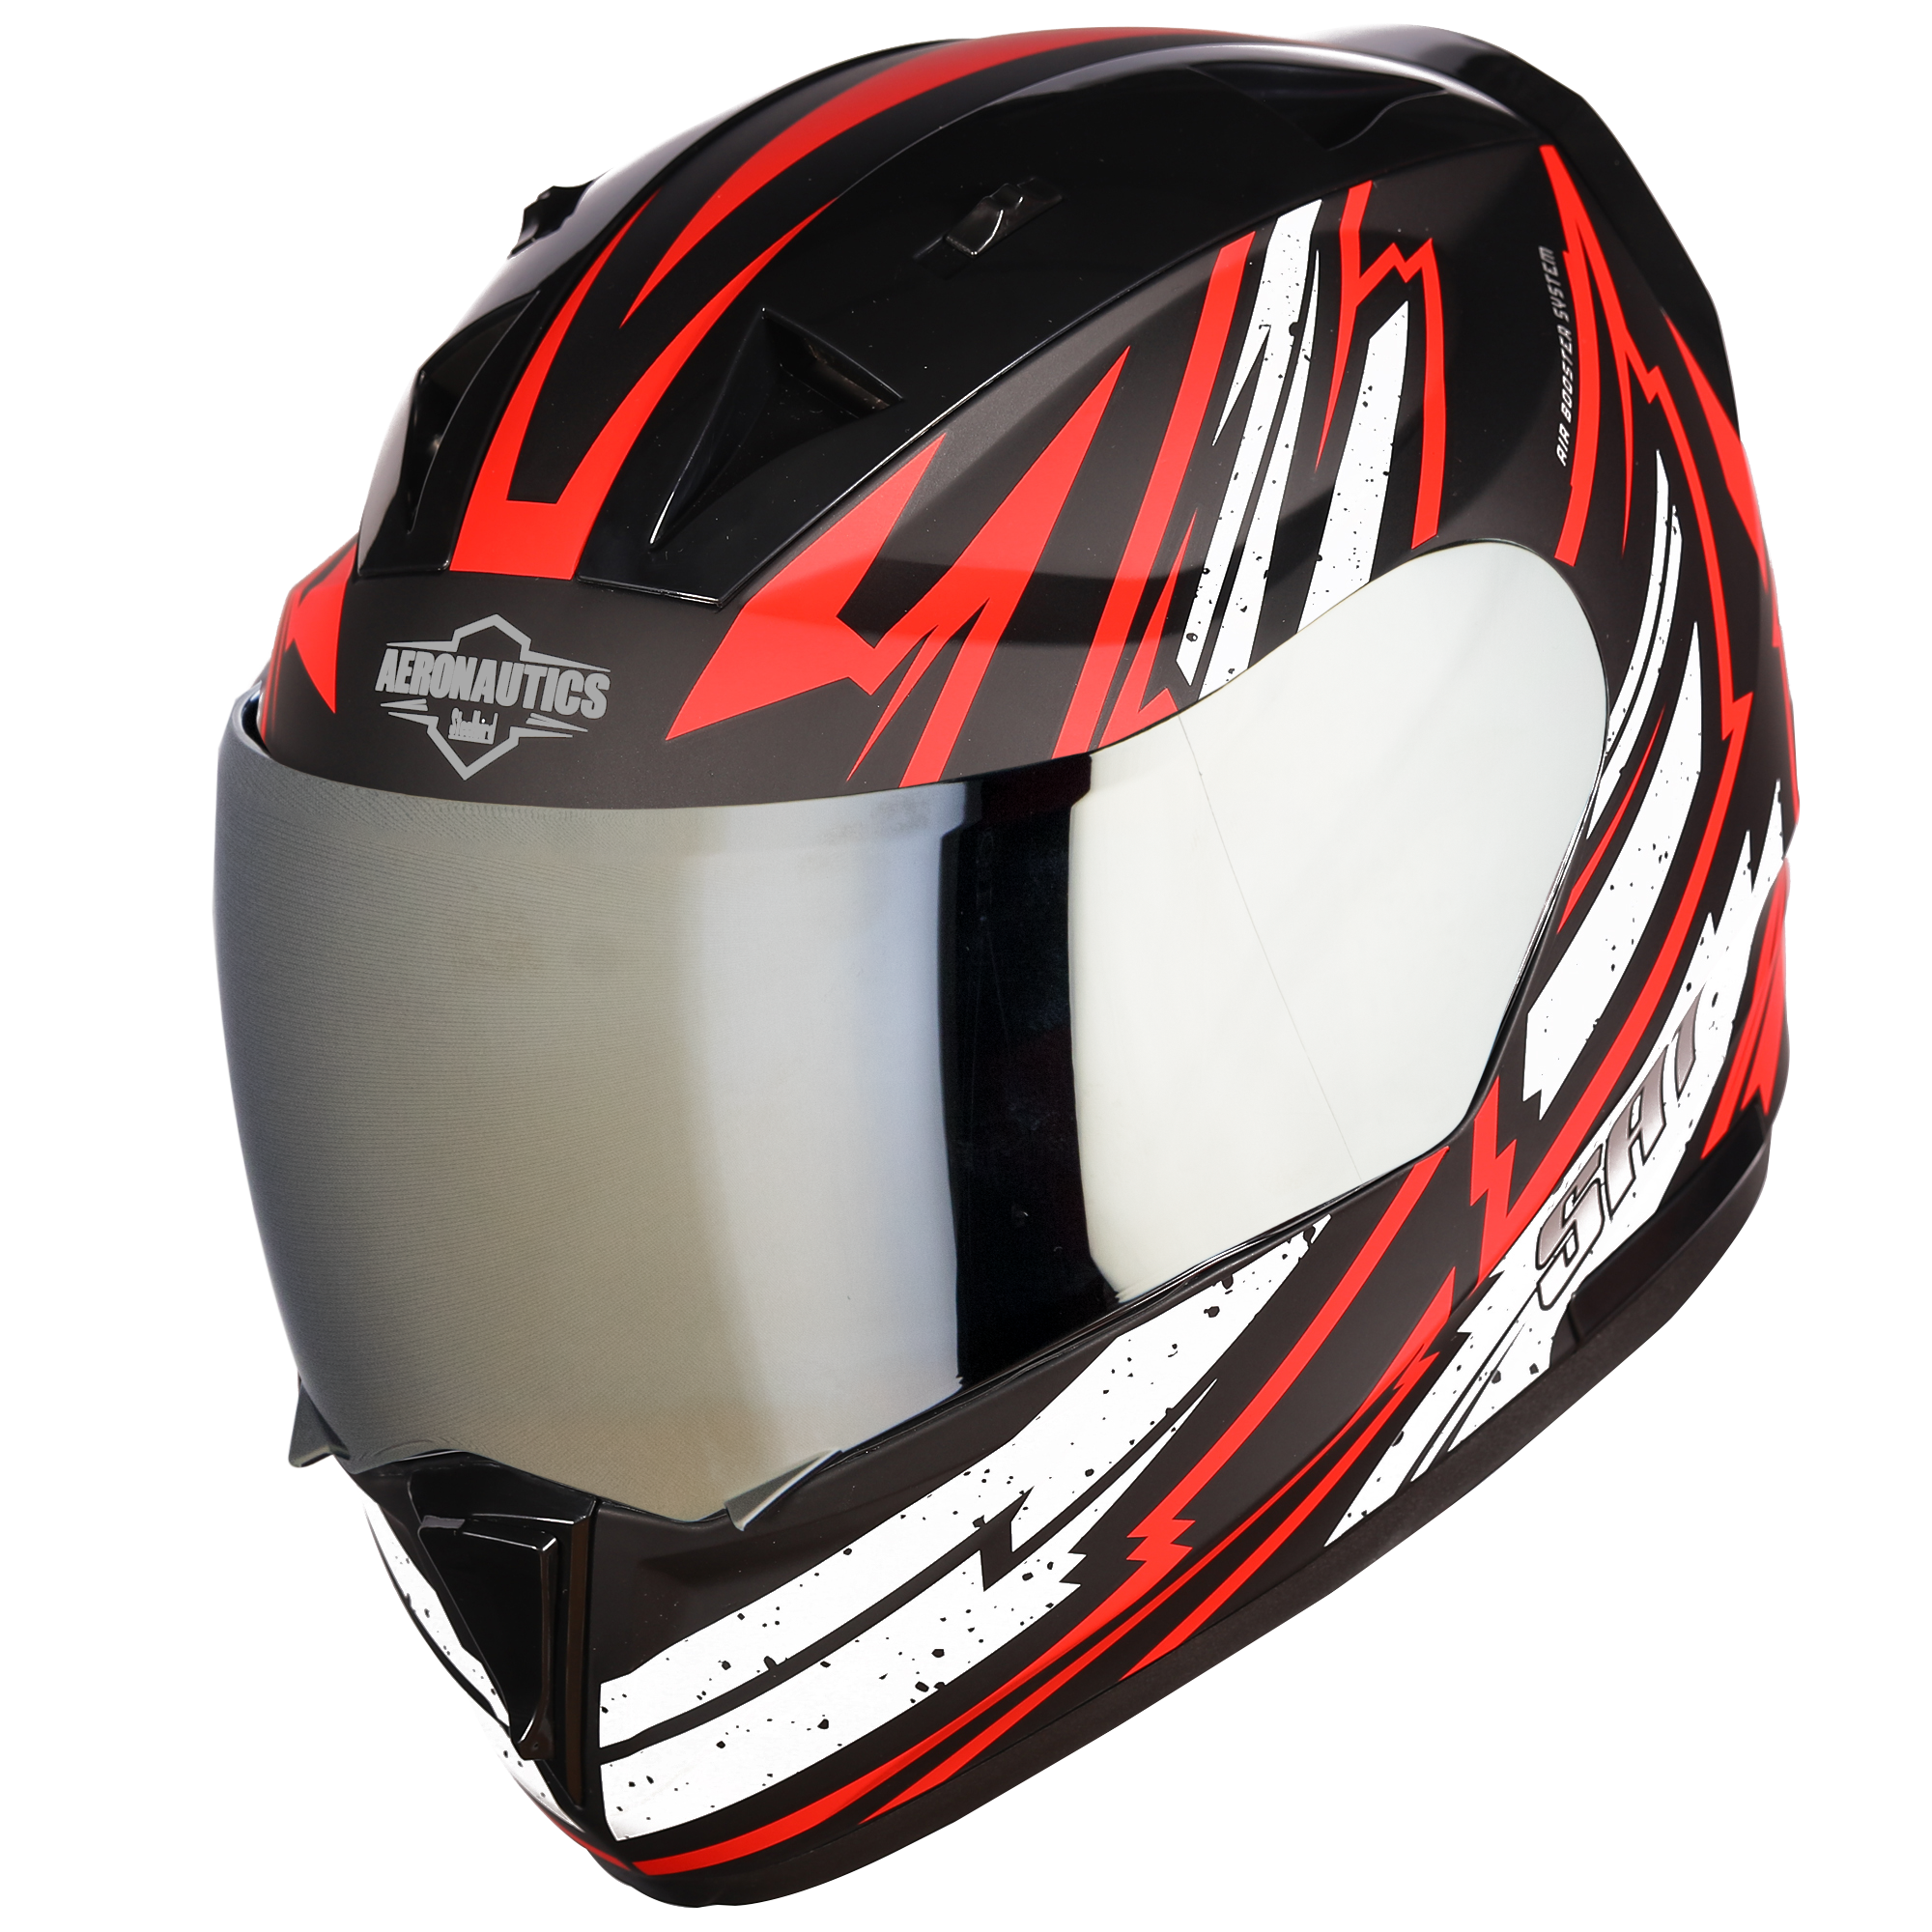 SA-1 BOOSTER MAT BLACK WITH RED - CHROME SILVER VISOR (WITH EXTRA CLEAR VISOR)